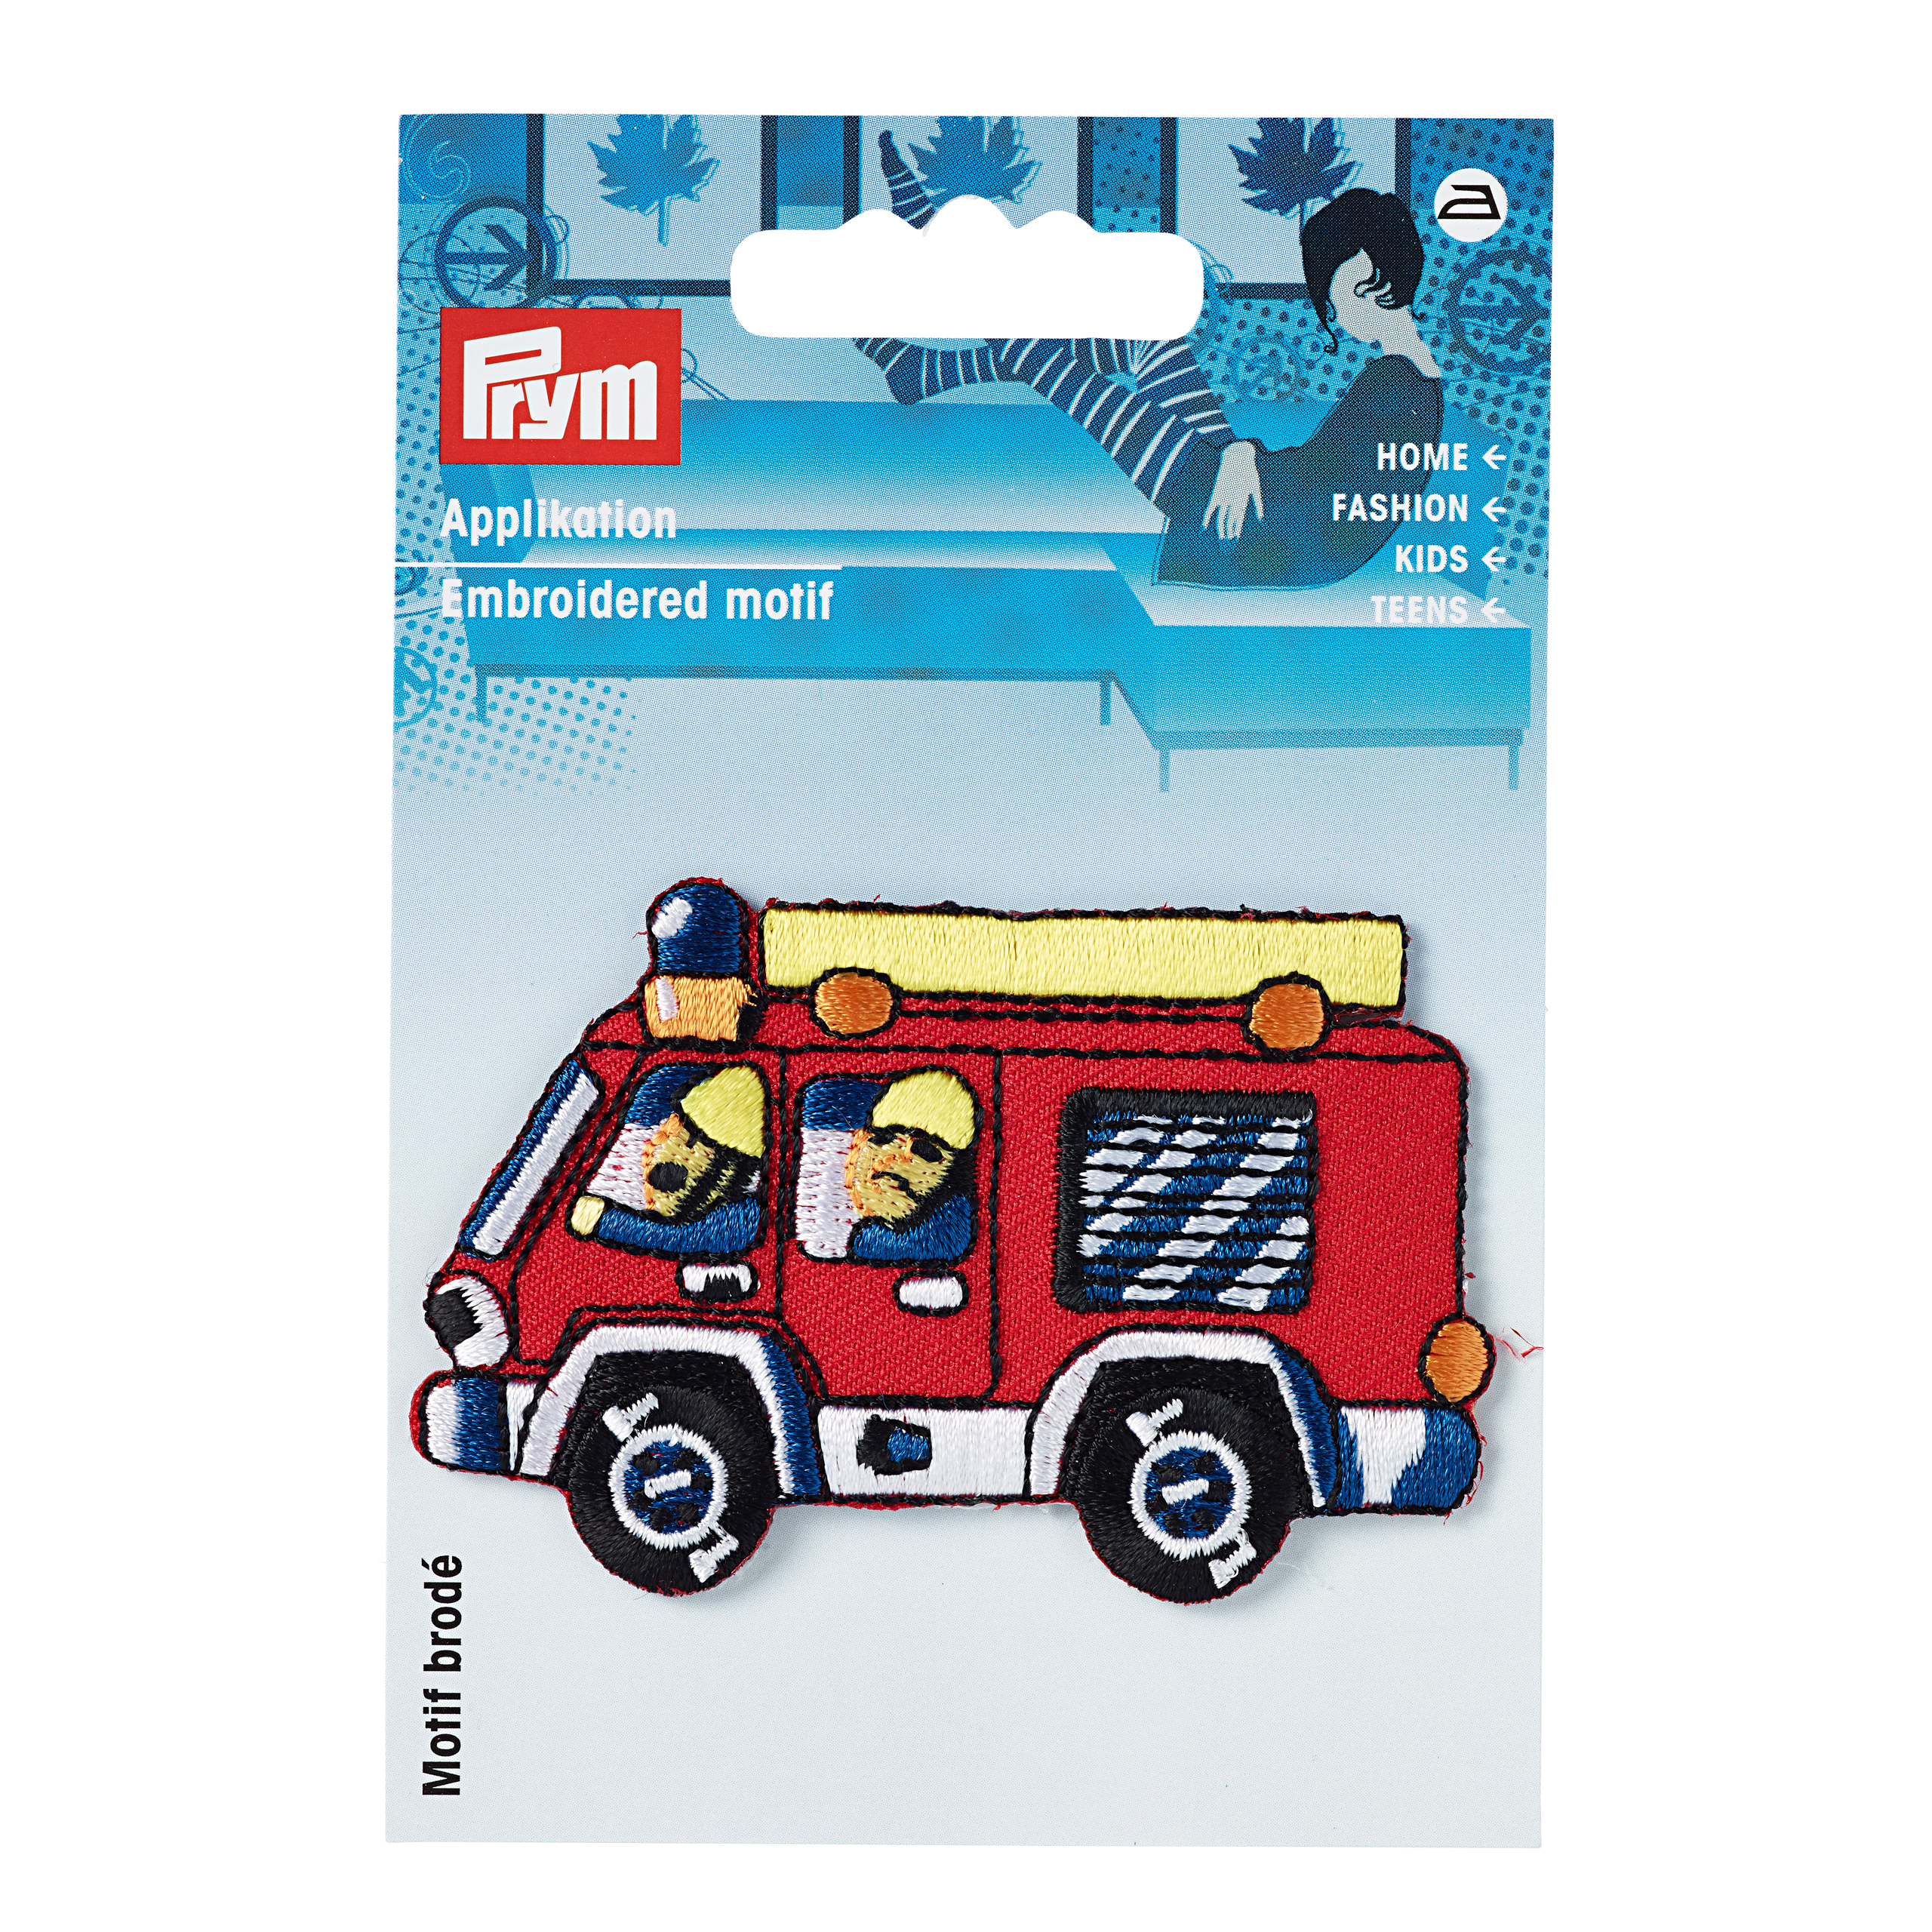 Appl. Fire engine red, 1 St